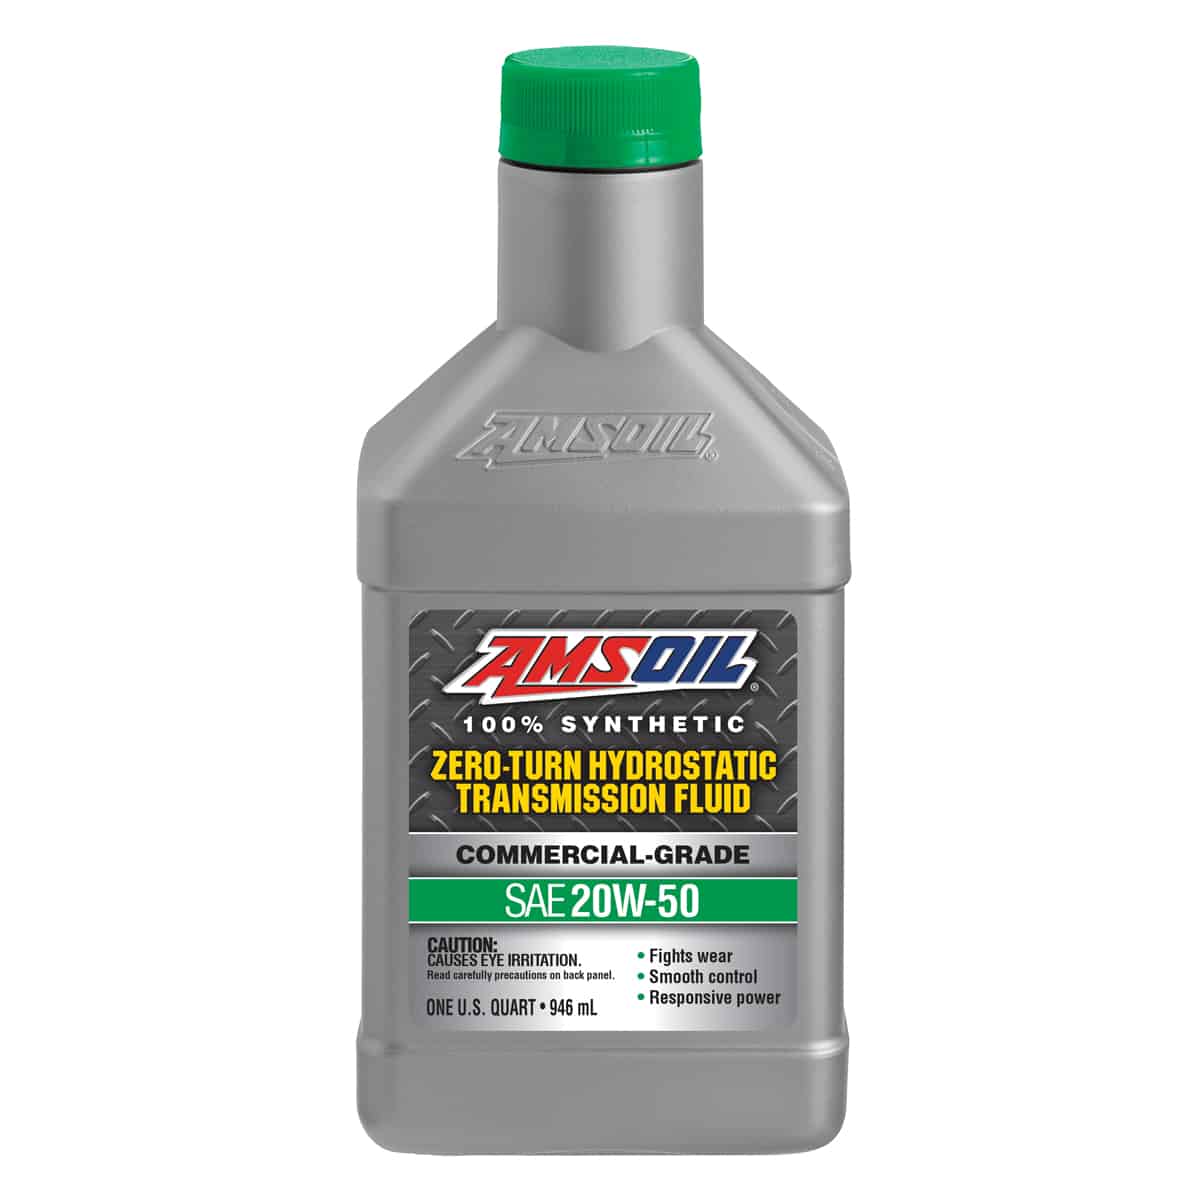 A bottle of AMSOIL Synthetic Hydrostatic Transmission Fluid, purposely-built to withstand the unique demands of hydrostatic transmissions.